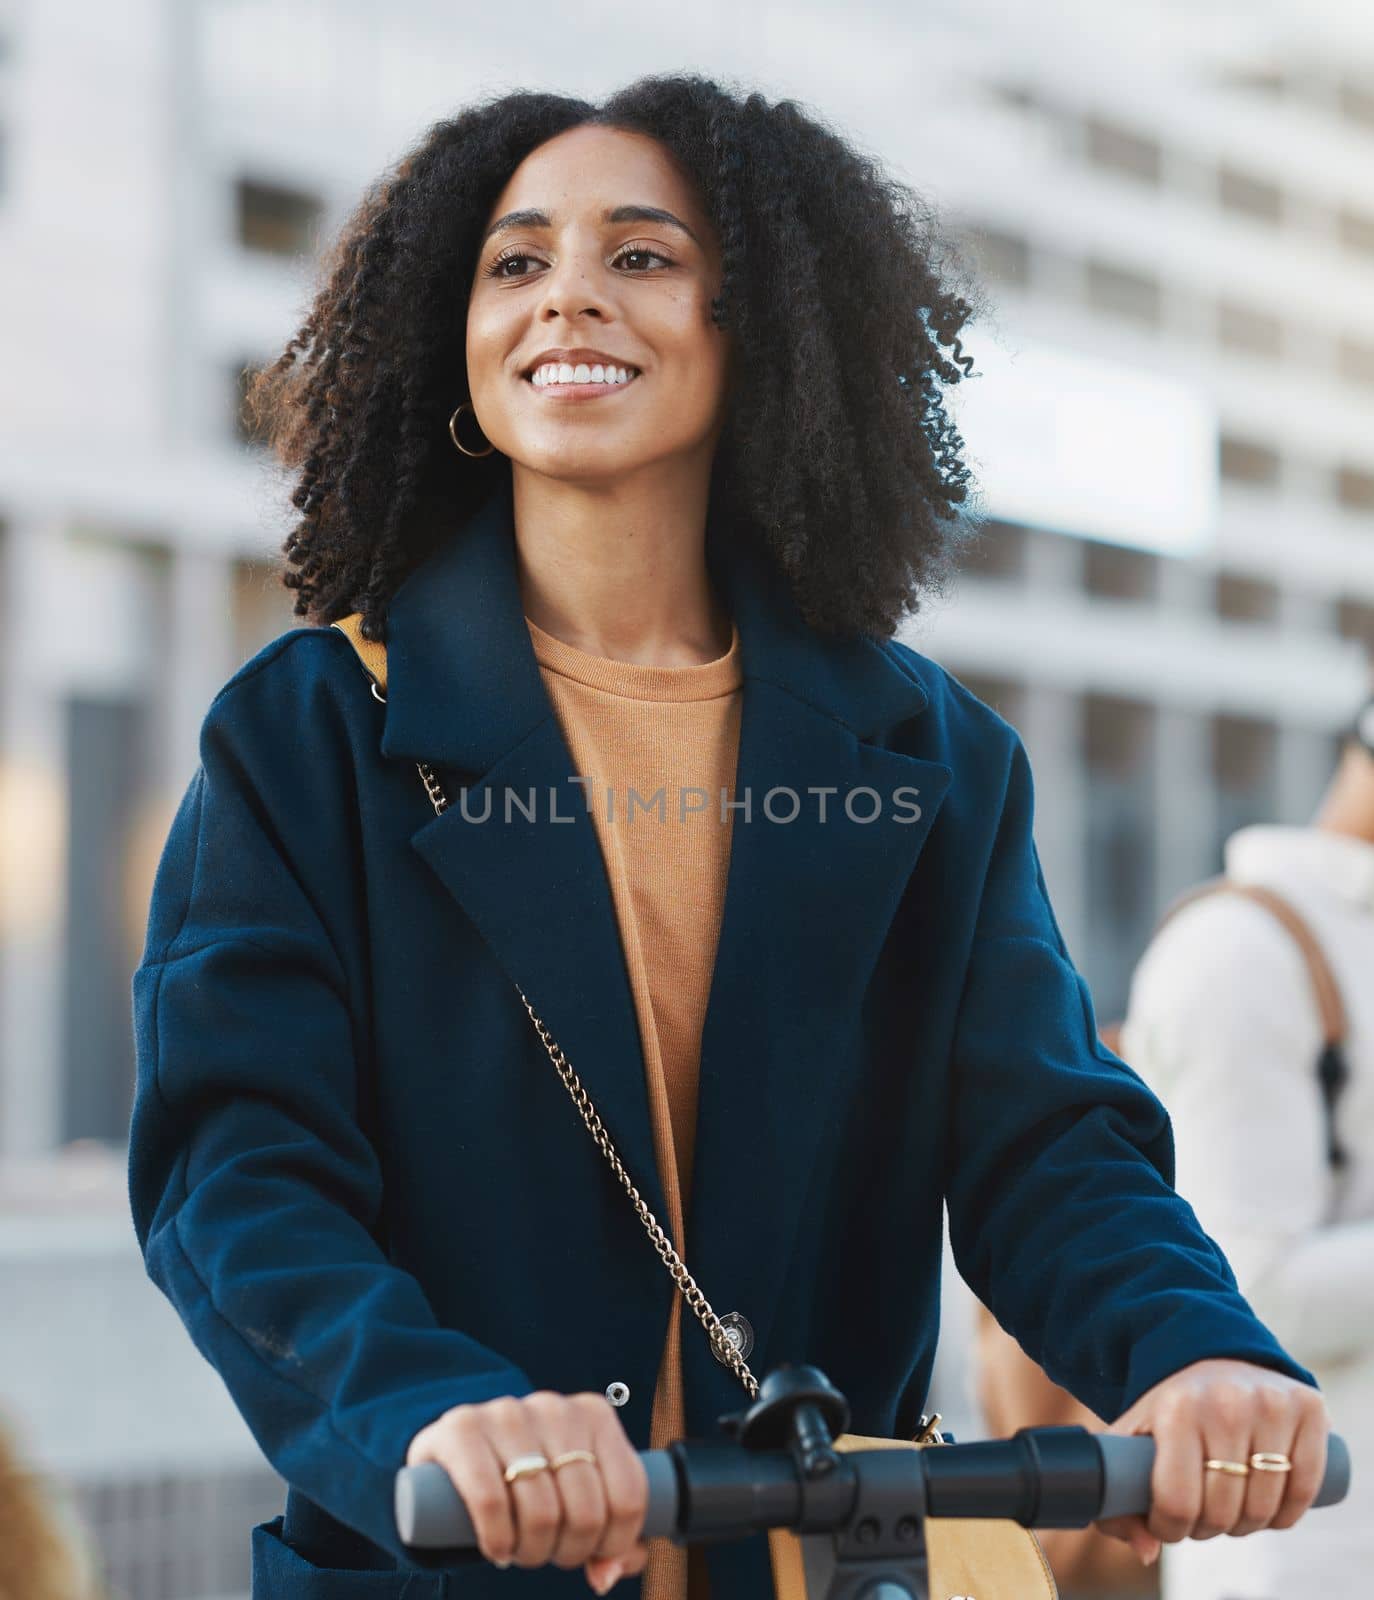 Black woman, scooter and city travel of a person with bicycle and urban eco friendly transportation. Happy young female on electric ride with smile ready for morning traveling to work with happiness.